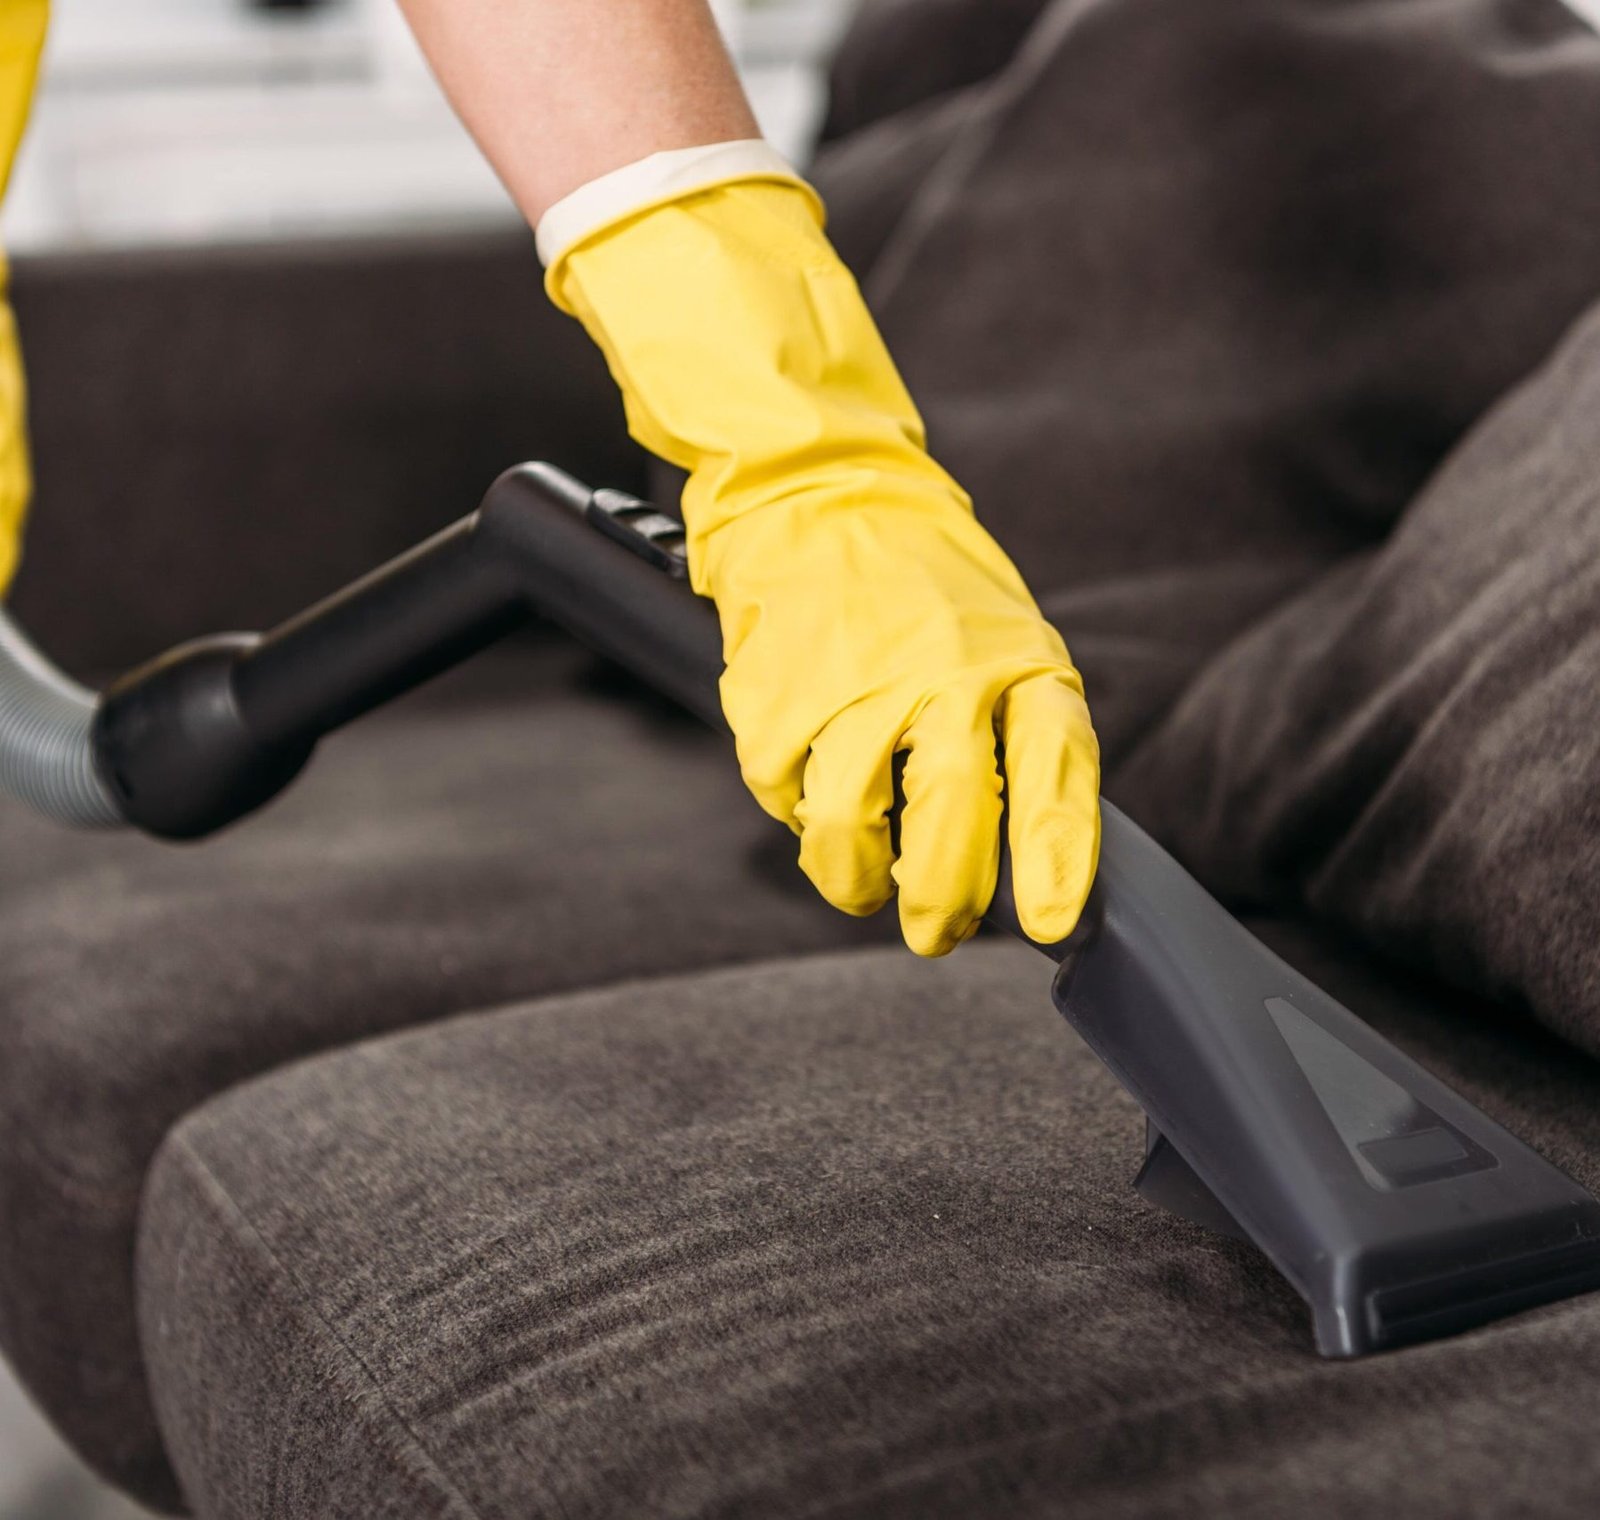 Dublin Cleaning Service